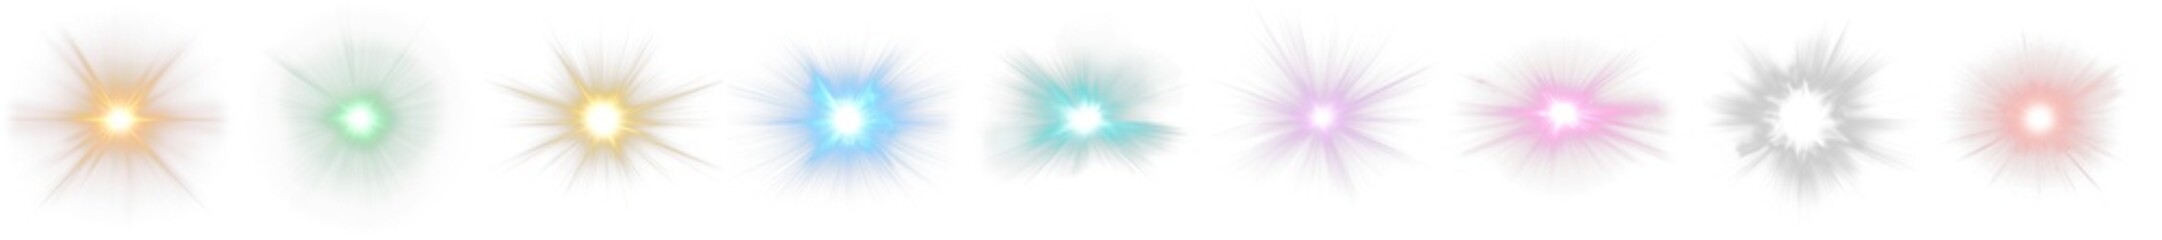 Glowing color light flair set. Isolated transparent background. Various colors of glowing lens...